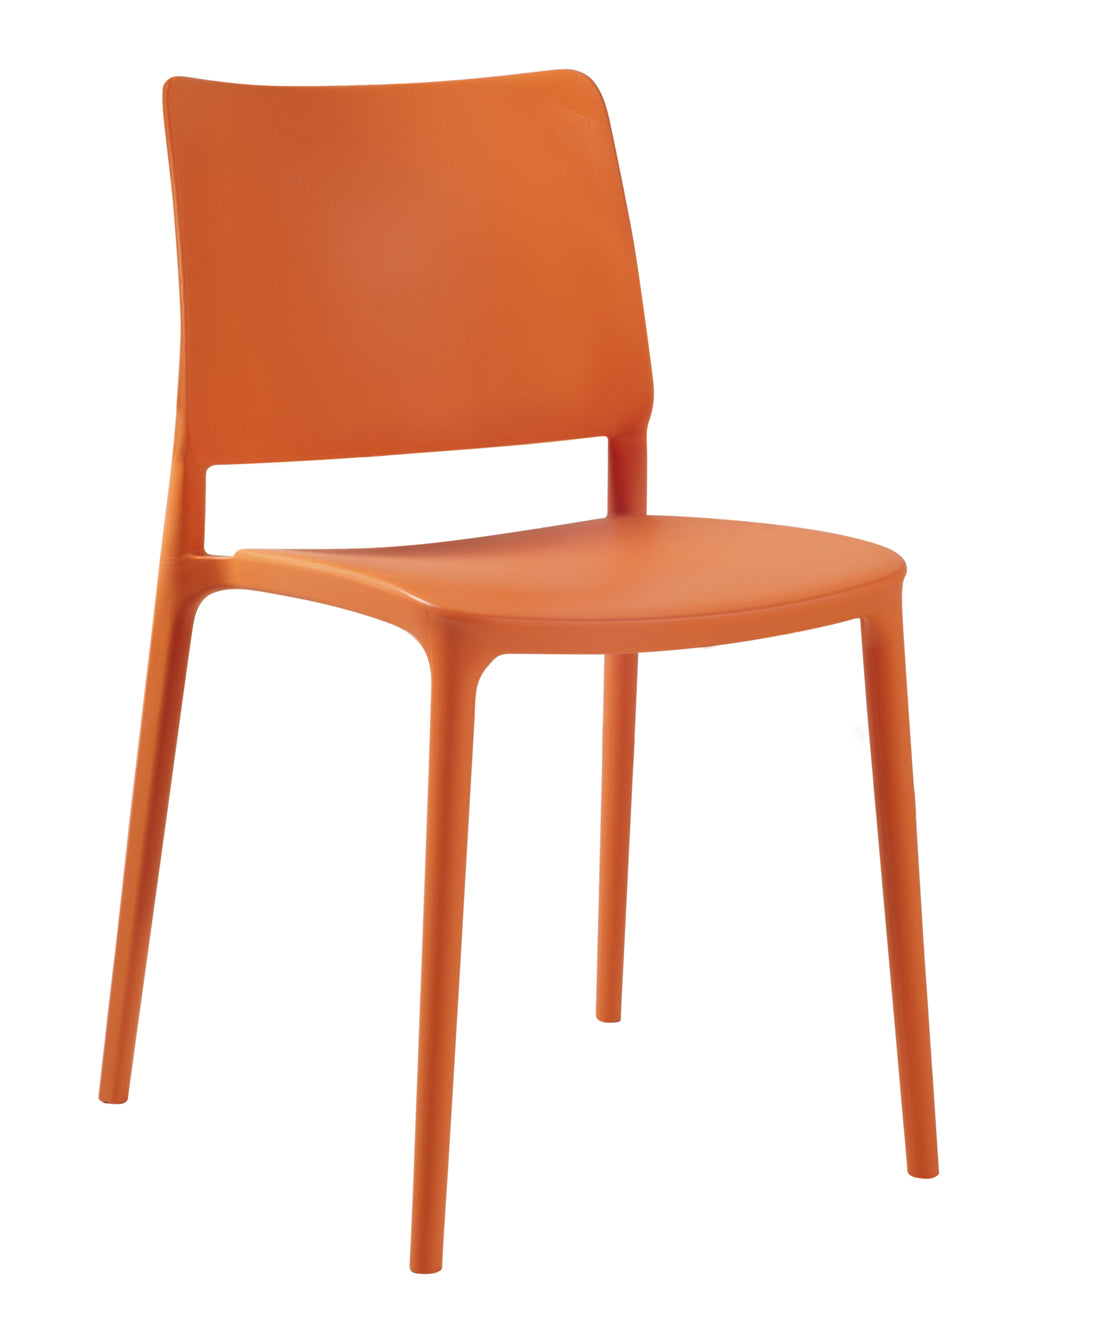 Cleo Patio Dining Chair in Orange - (Set of 2)